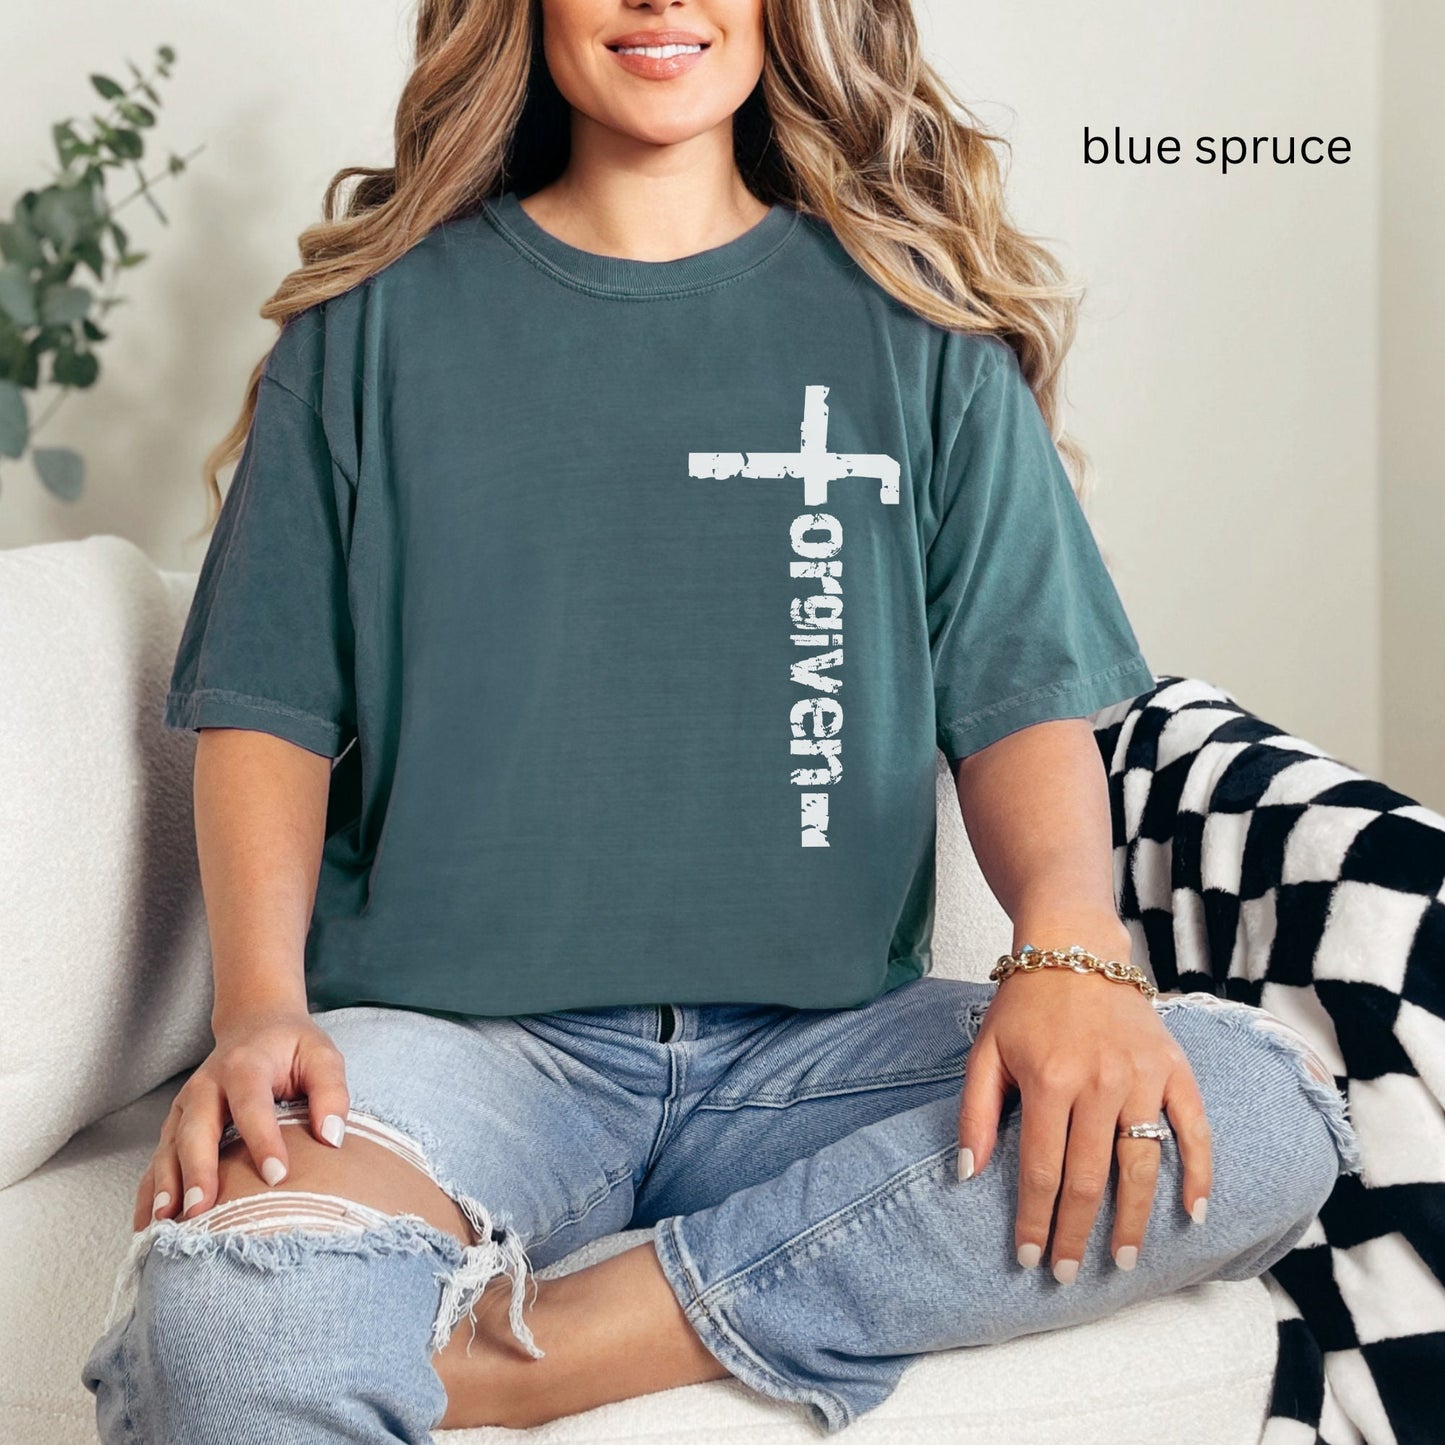 Christian grunge Bible Verse Comfort Color t-shirt in blue spruce color